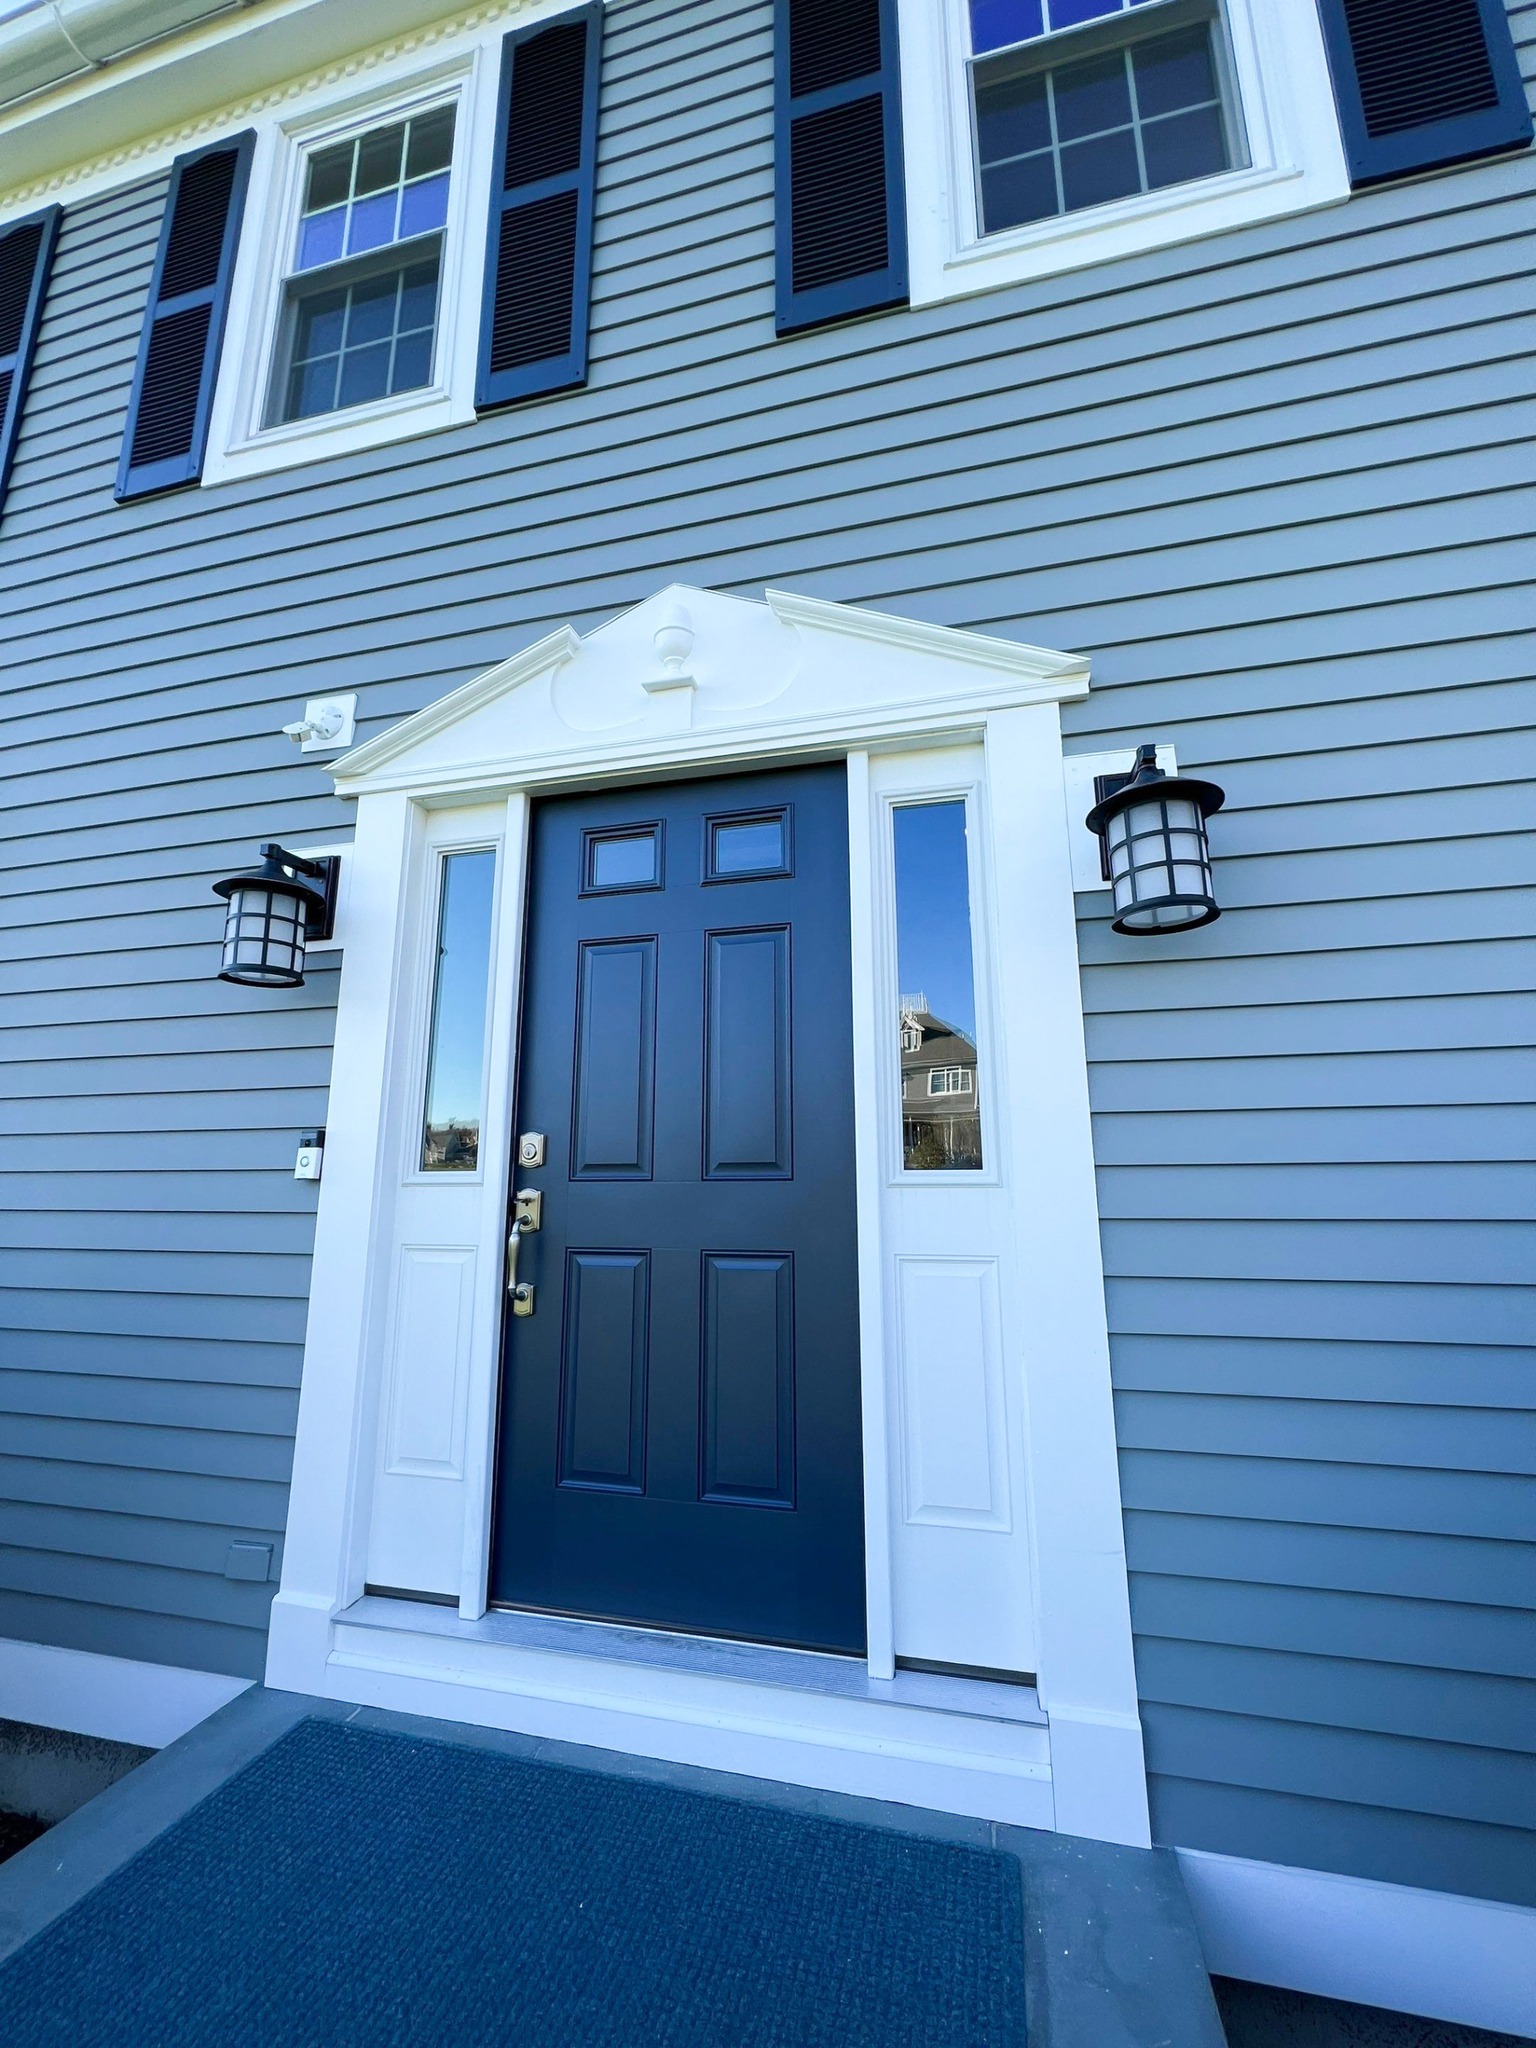 How to choose exterior paint colors for your home